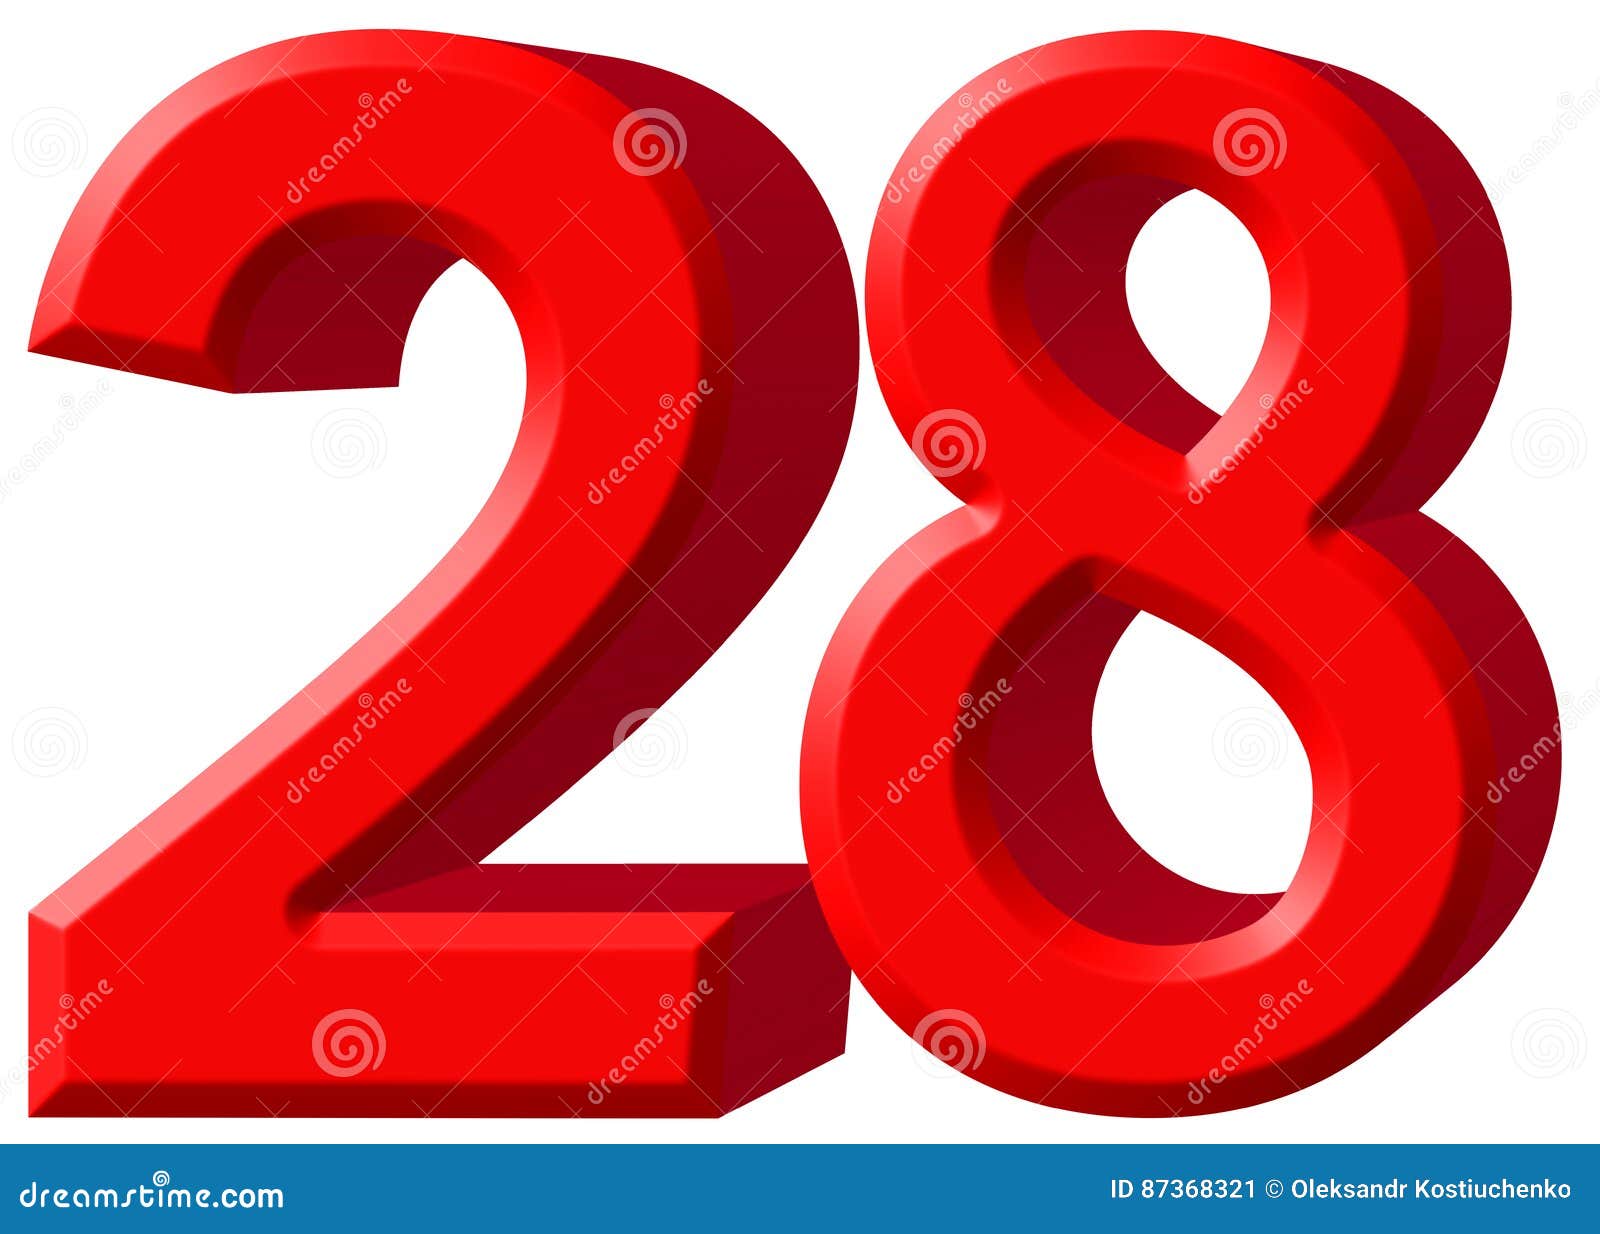 Numeral 28 Stock Illustrations – 60 Numeral 28 Stock Illustrations